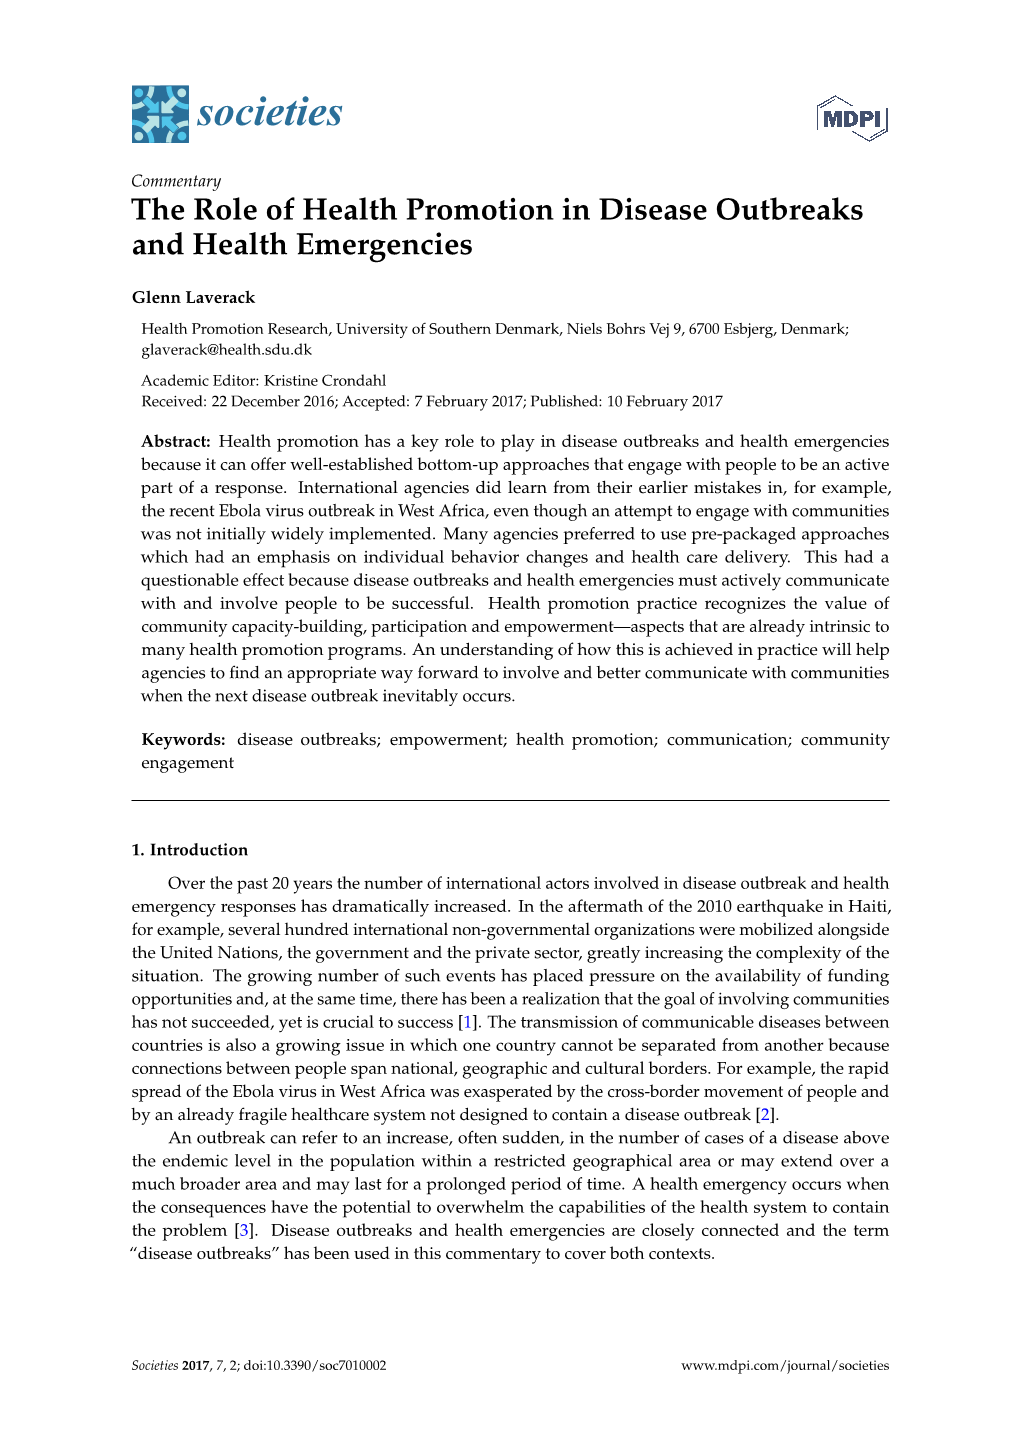 The Role of Health Promotion in Disease Outbreaks and Health Emergencies